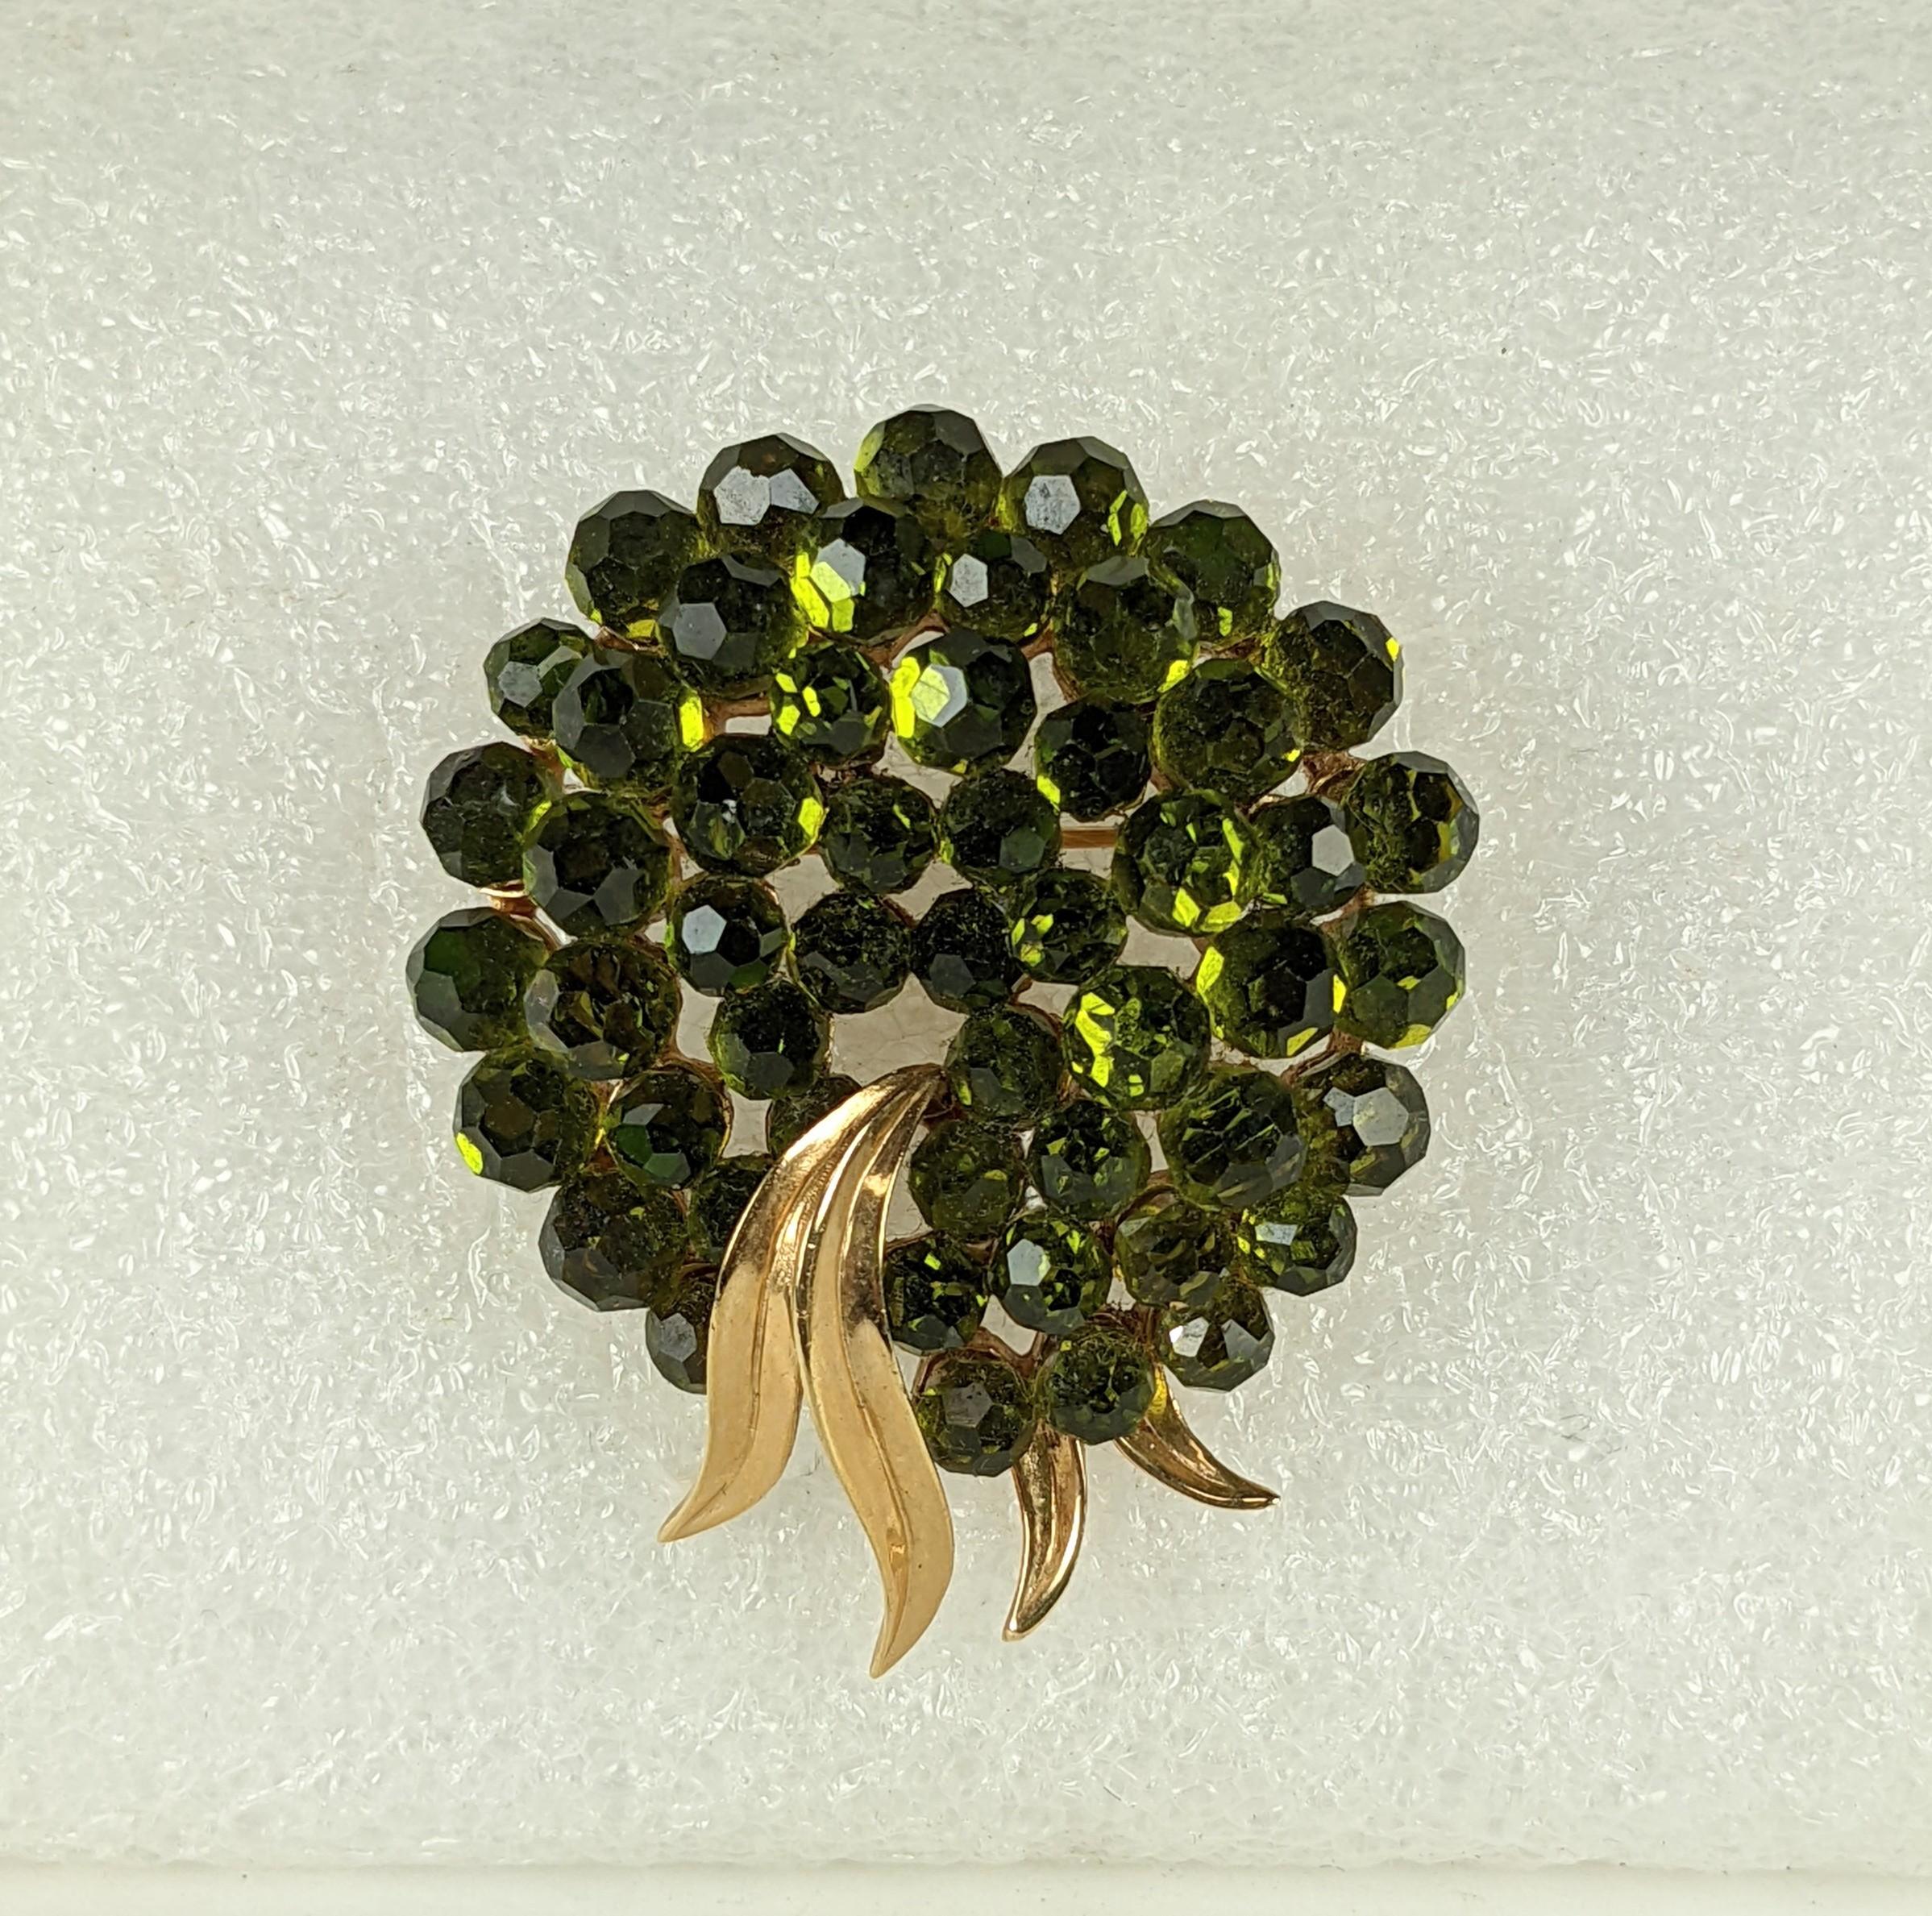 Striking Trifari Swarovski Crystal Olivine Bead Brooch from the 1960's. Dozens of faceted olive crystal balls are set into the body of the brooch.  2